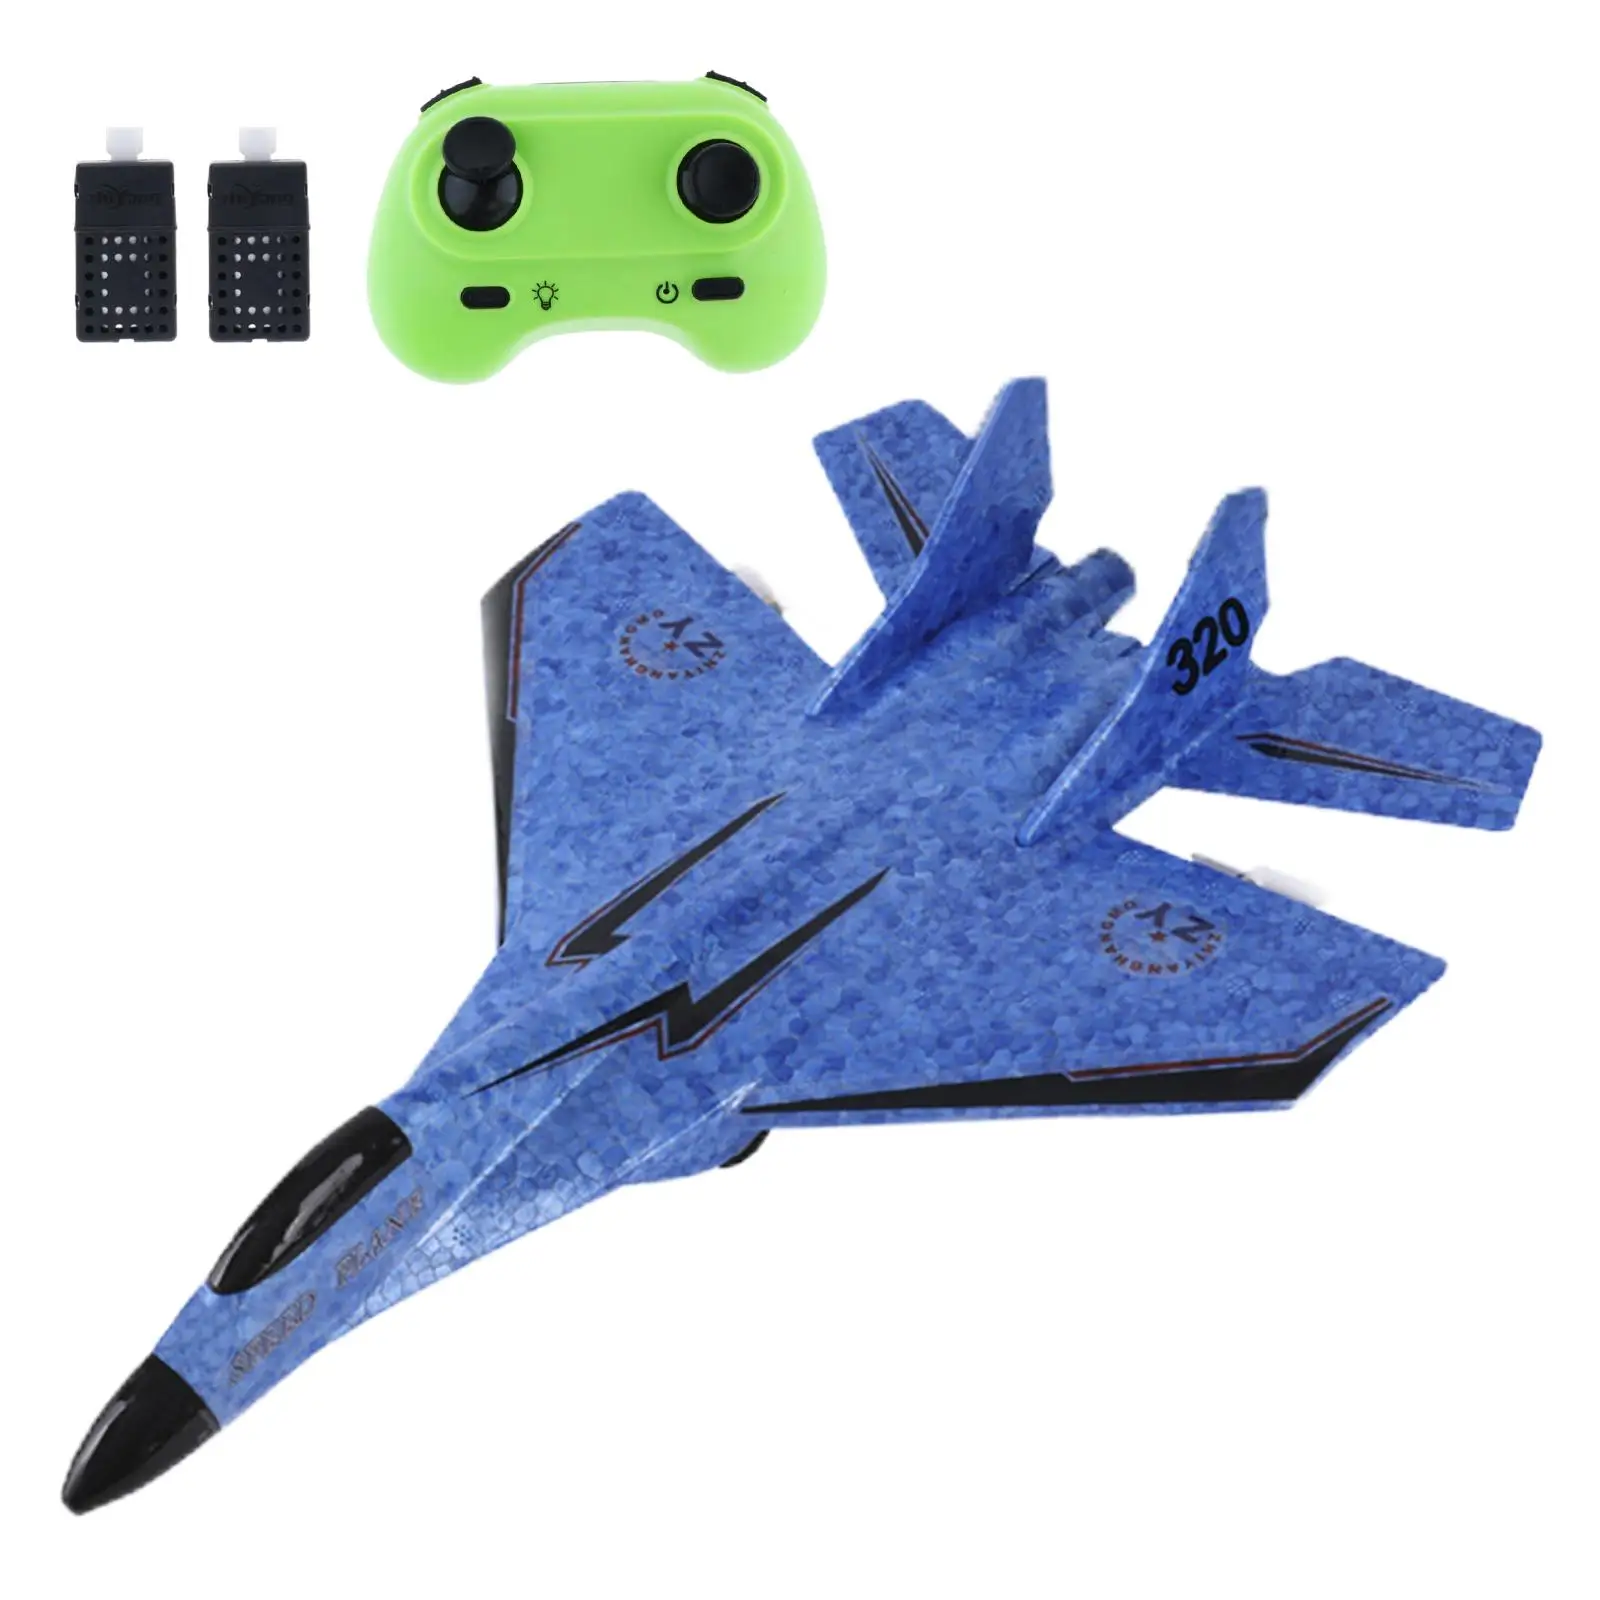 Fixed Wing Aircraft Foam Anti Falling RC Plane Toy Boy Gift Ready to Fly